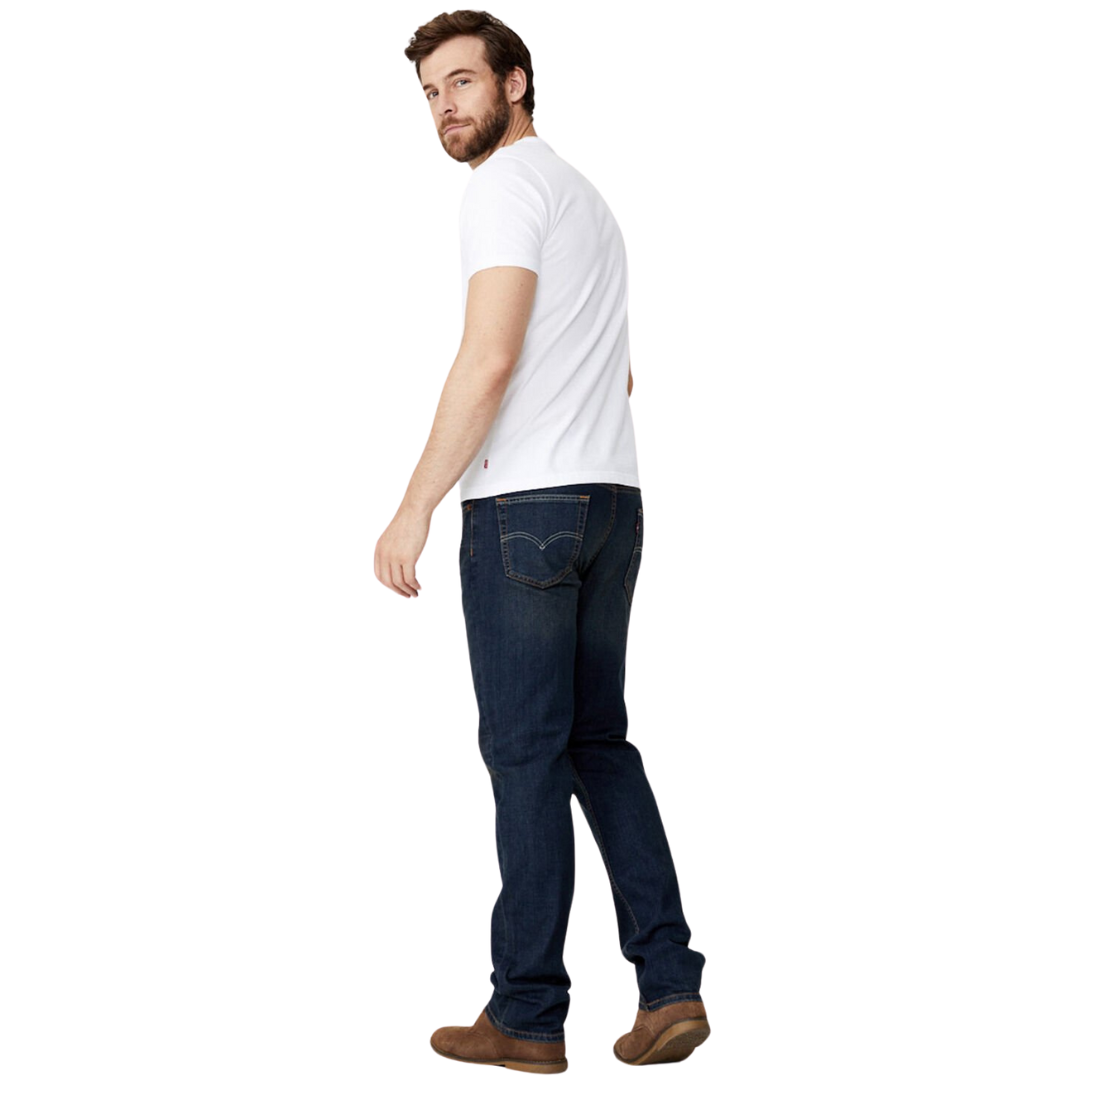 Levis 514 Straight Covered Up Mens Jeans by Levis | The Bloke Shop